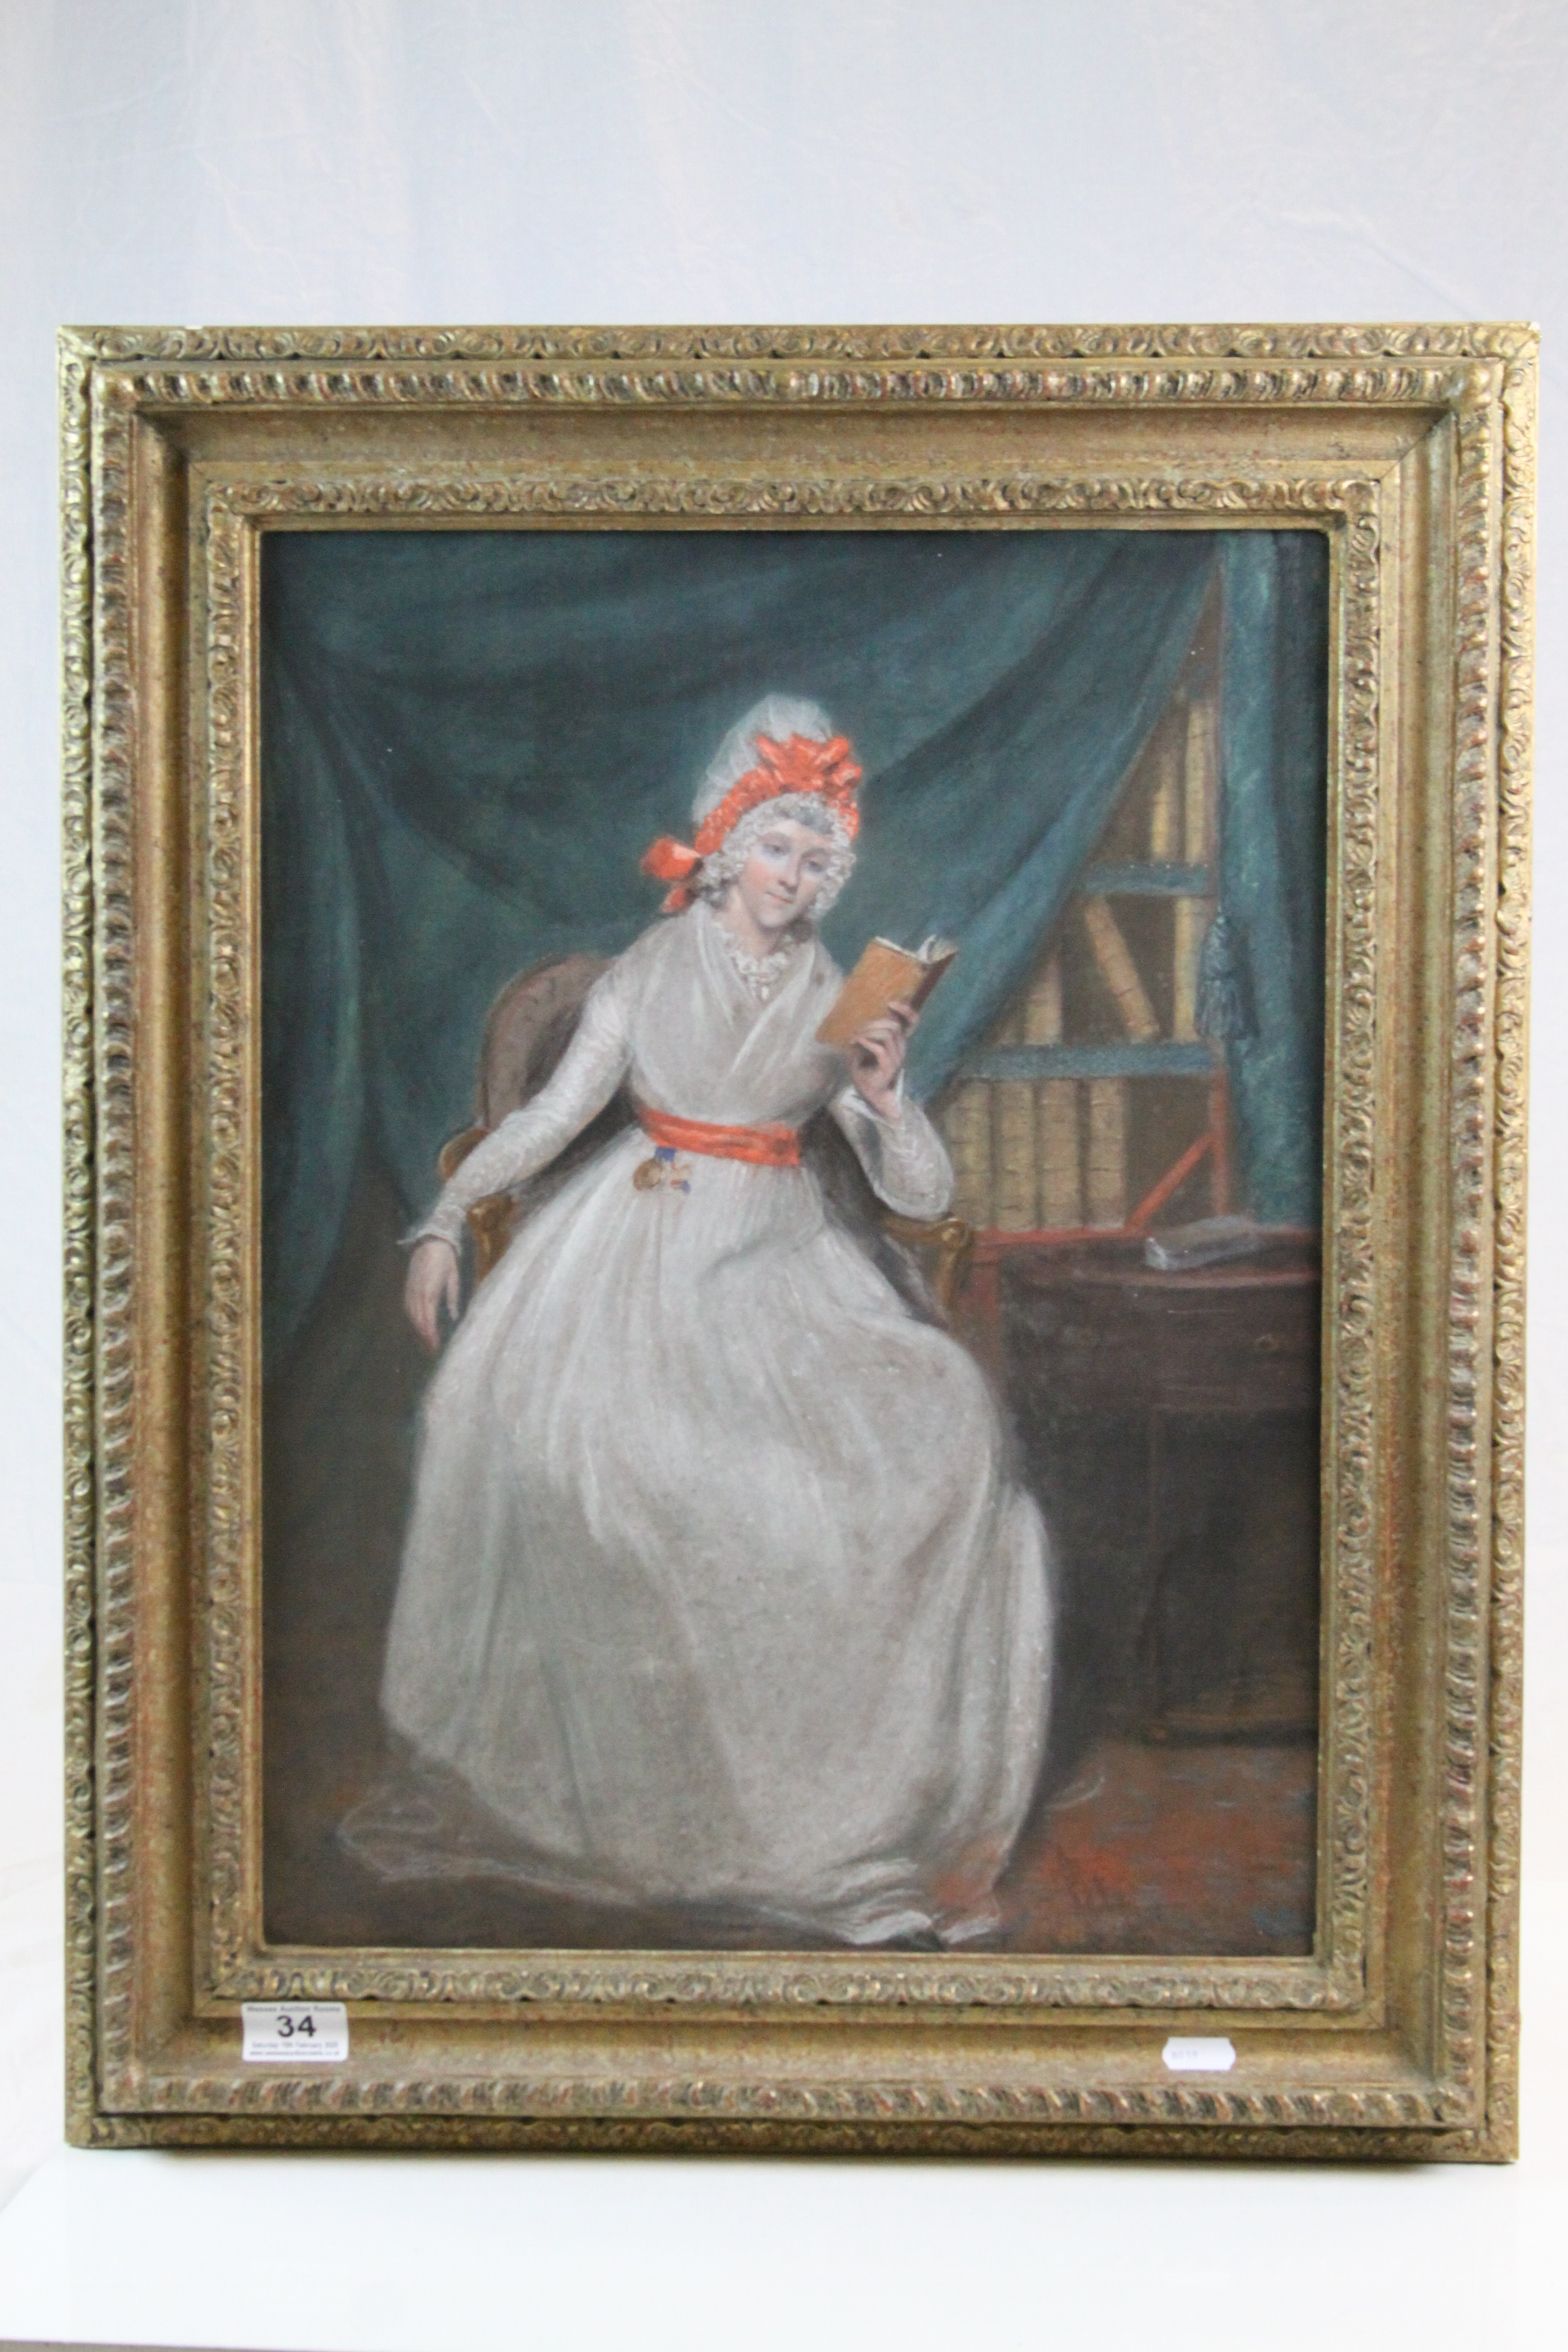 Gilt framed Pastel on canvas of a seated Lady reading a Book, image approx 52 x 38cm